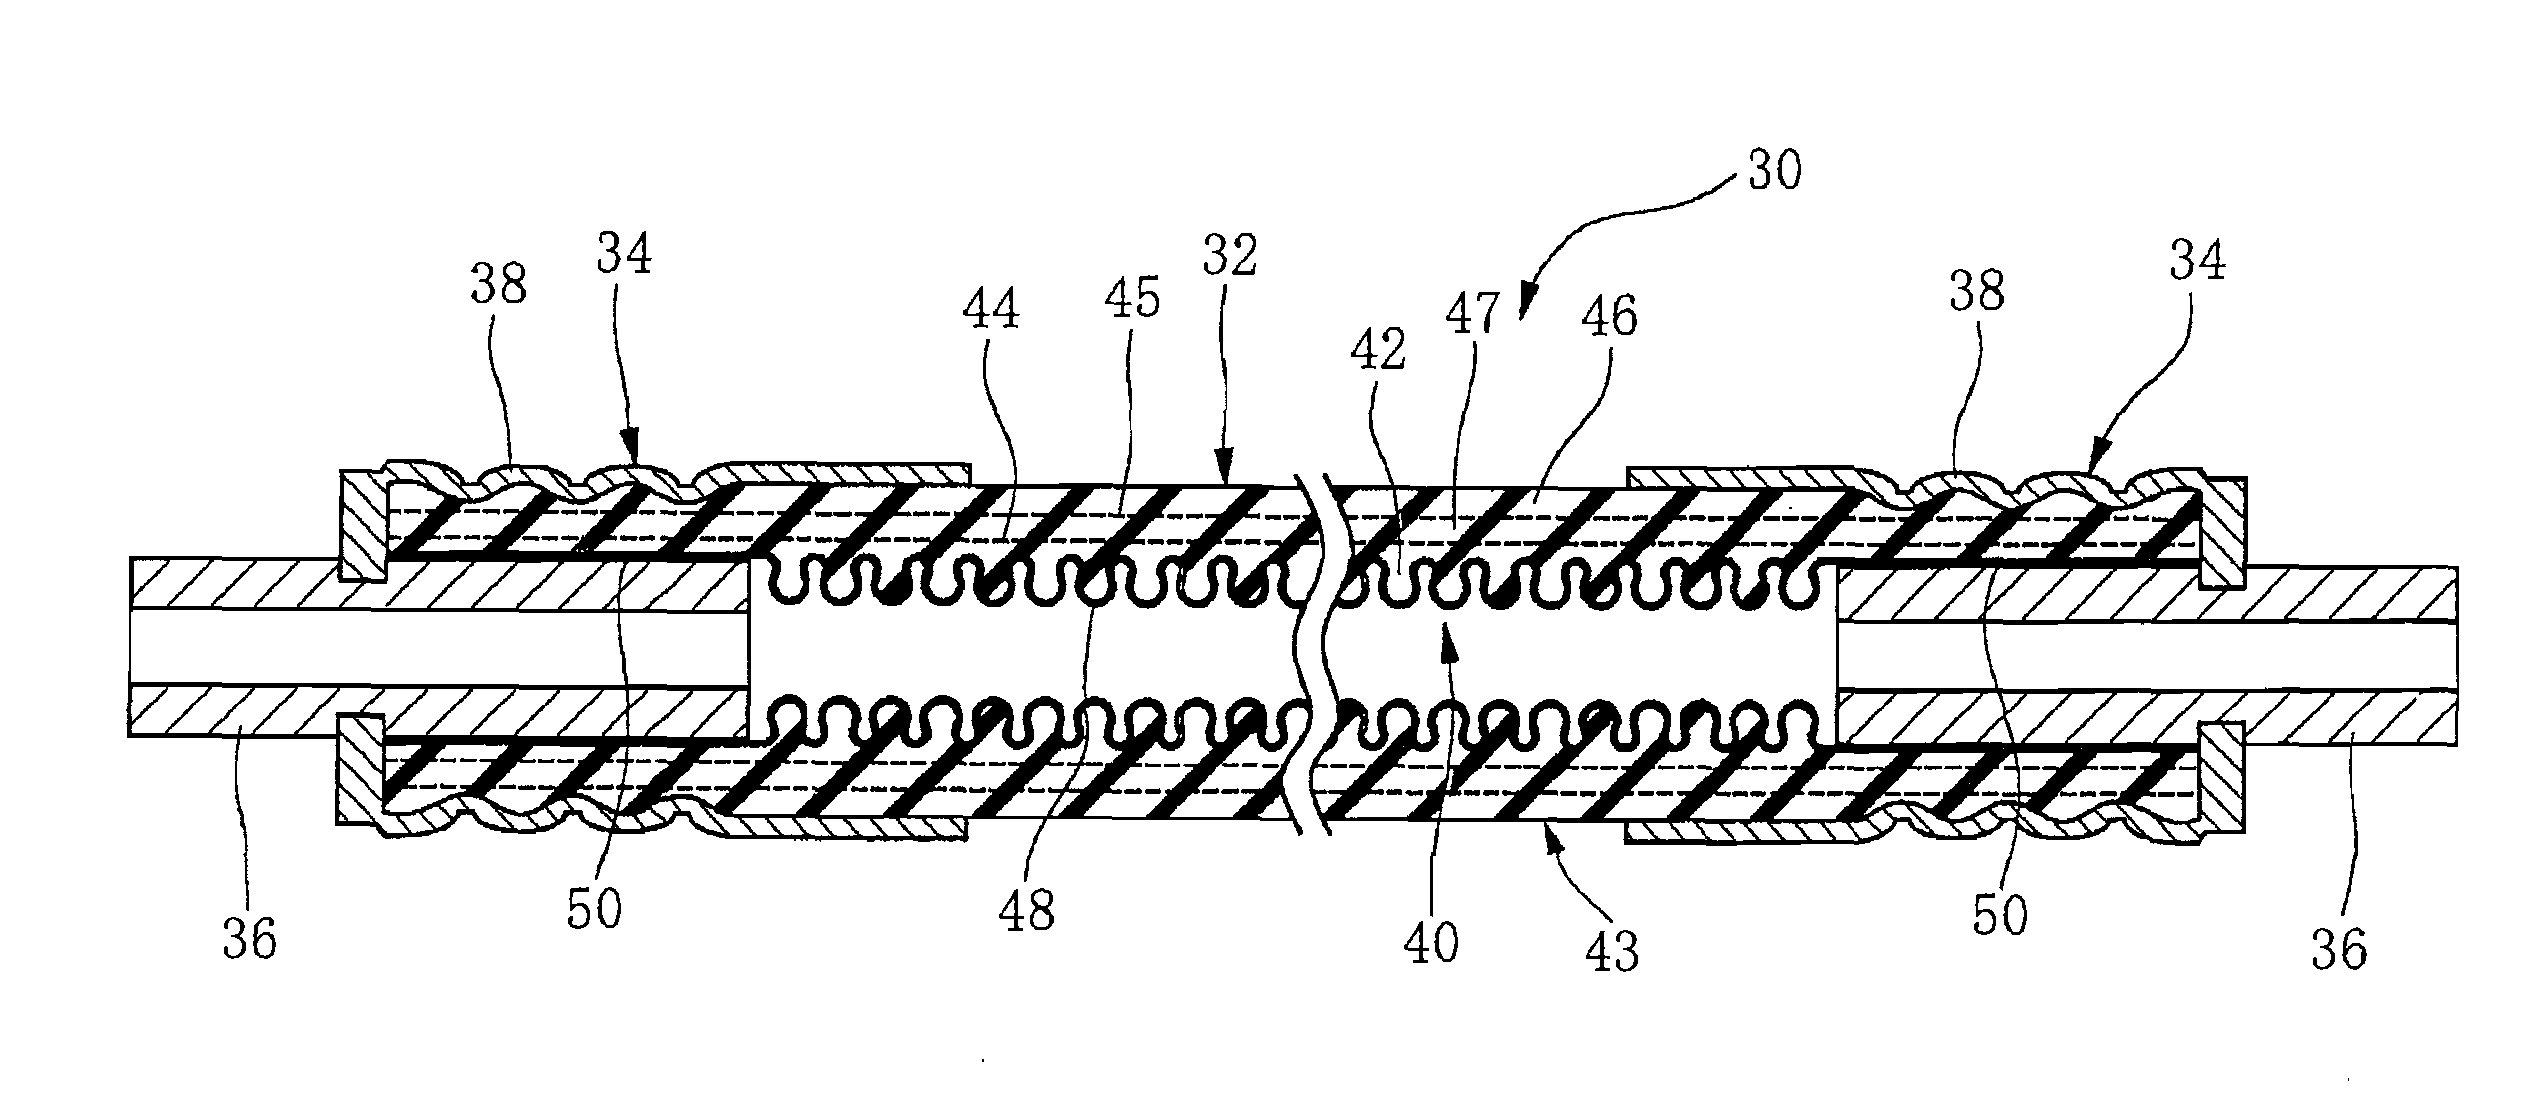 Composite Hose with a Corrugated Metal Tube and Method for Making the Same